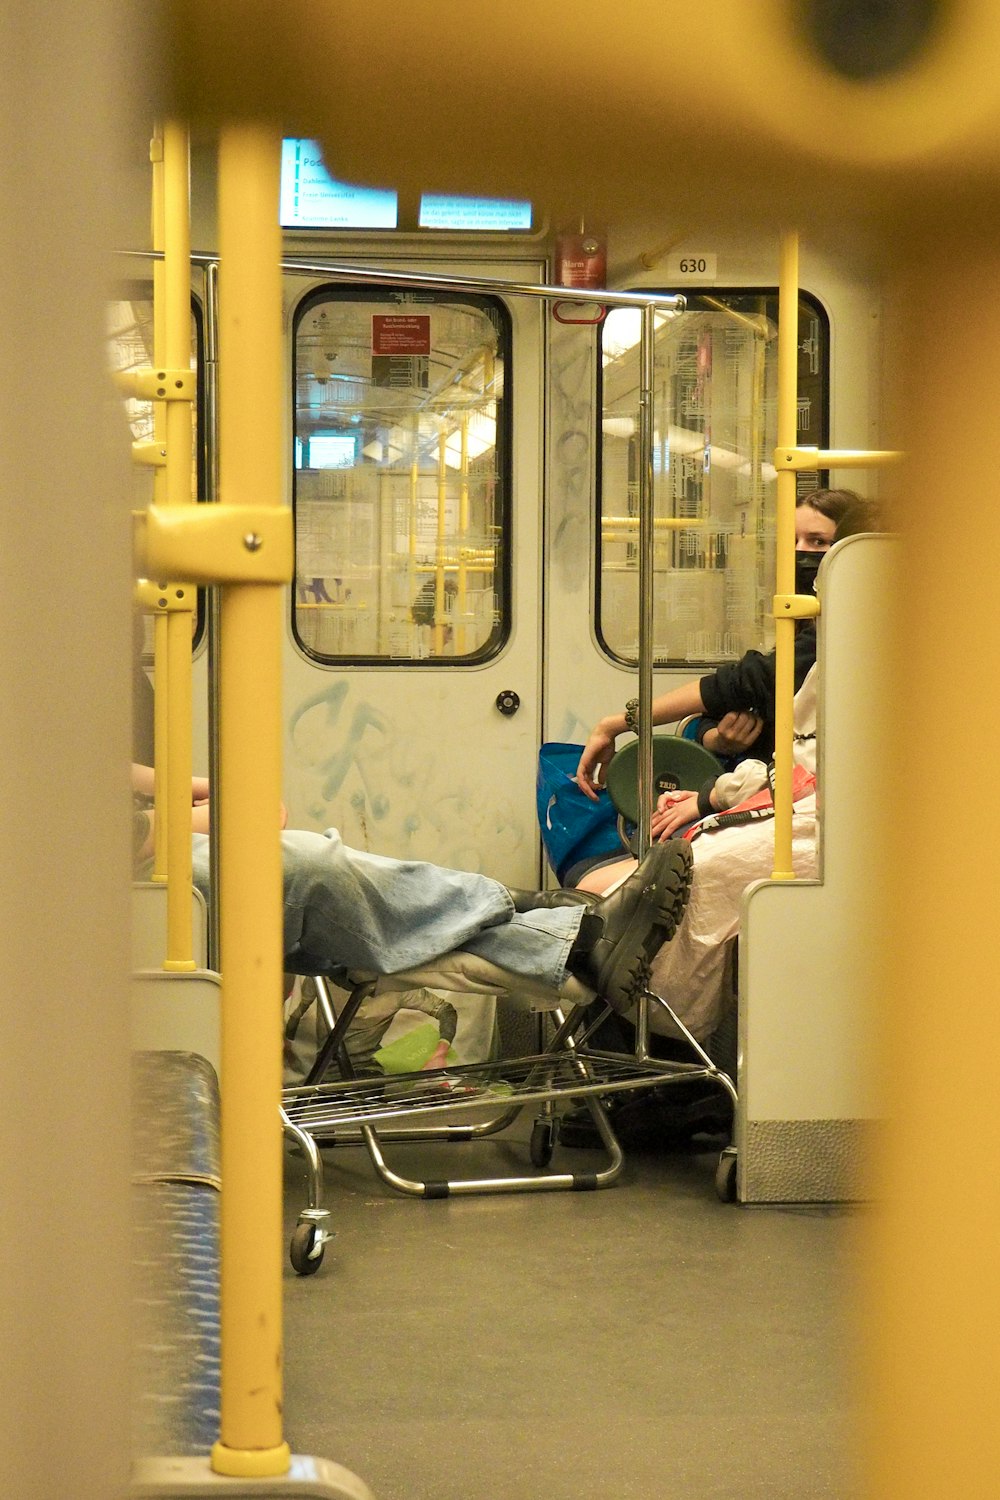 a person laying on a bed on a train